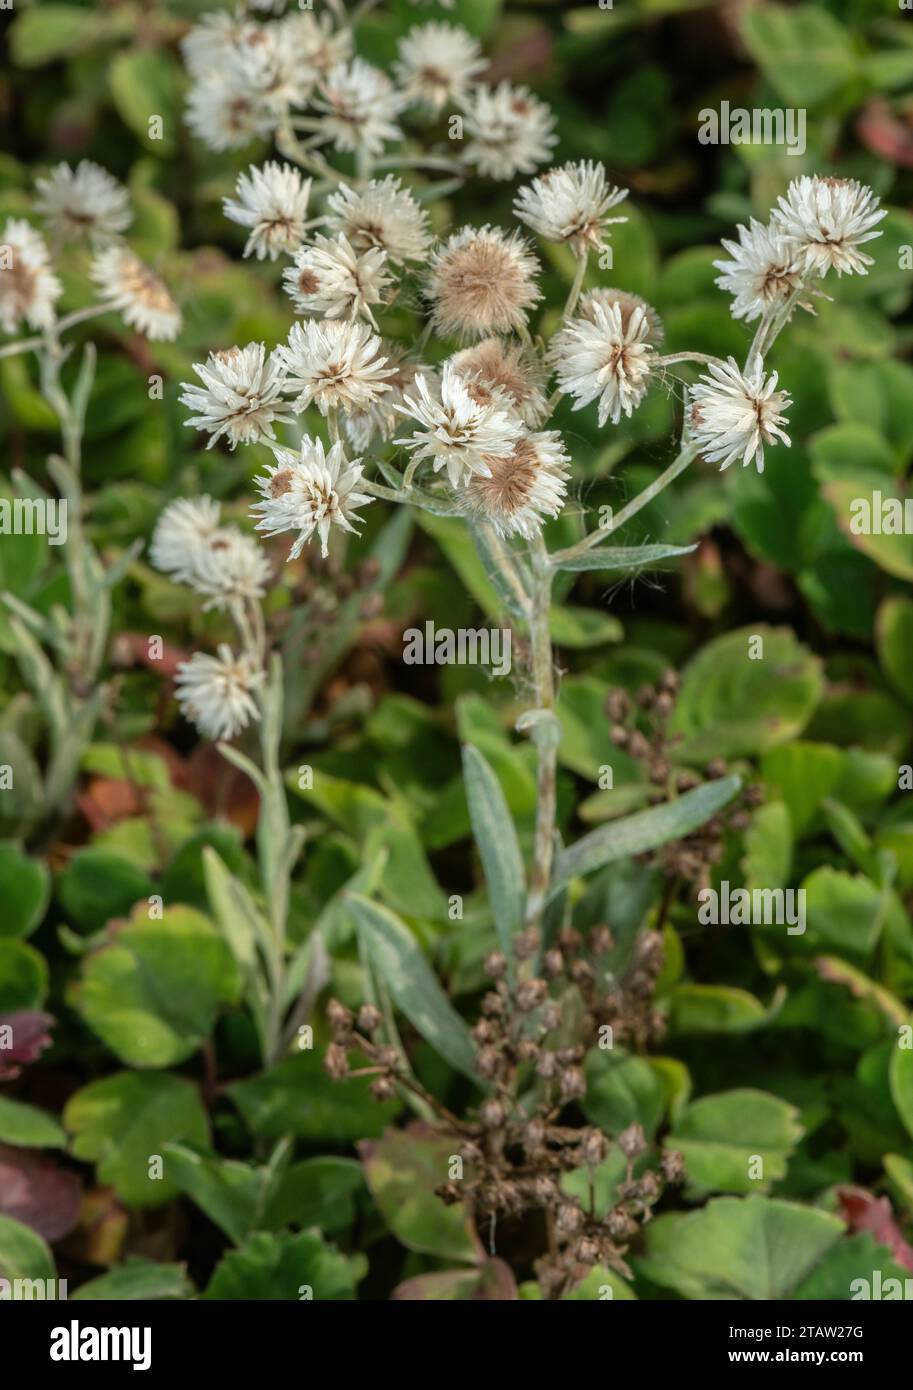 Triple-veined pearly everlasting, Anaphalis triplinervis, in flower; from the Himalayas Stock Photo